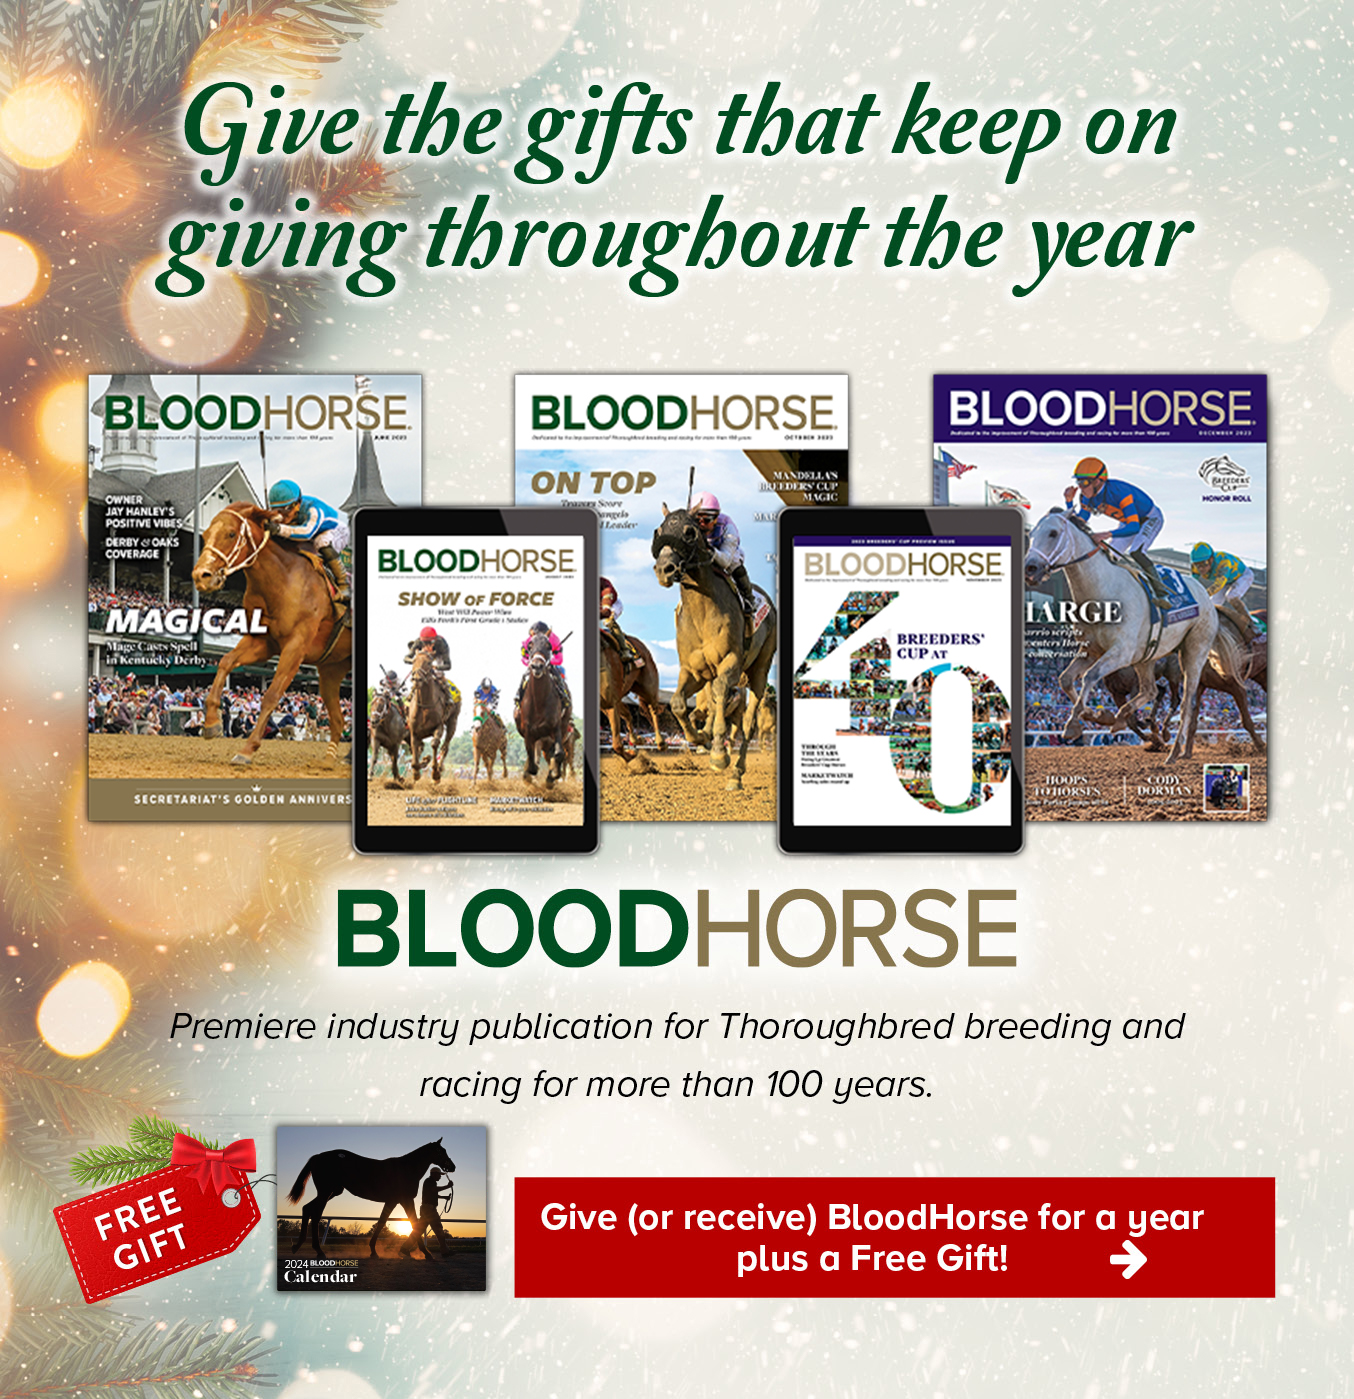 BLOODHORSE- Premiere weekly publication for Thoroughbred breeding and racing for more than 100 years.